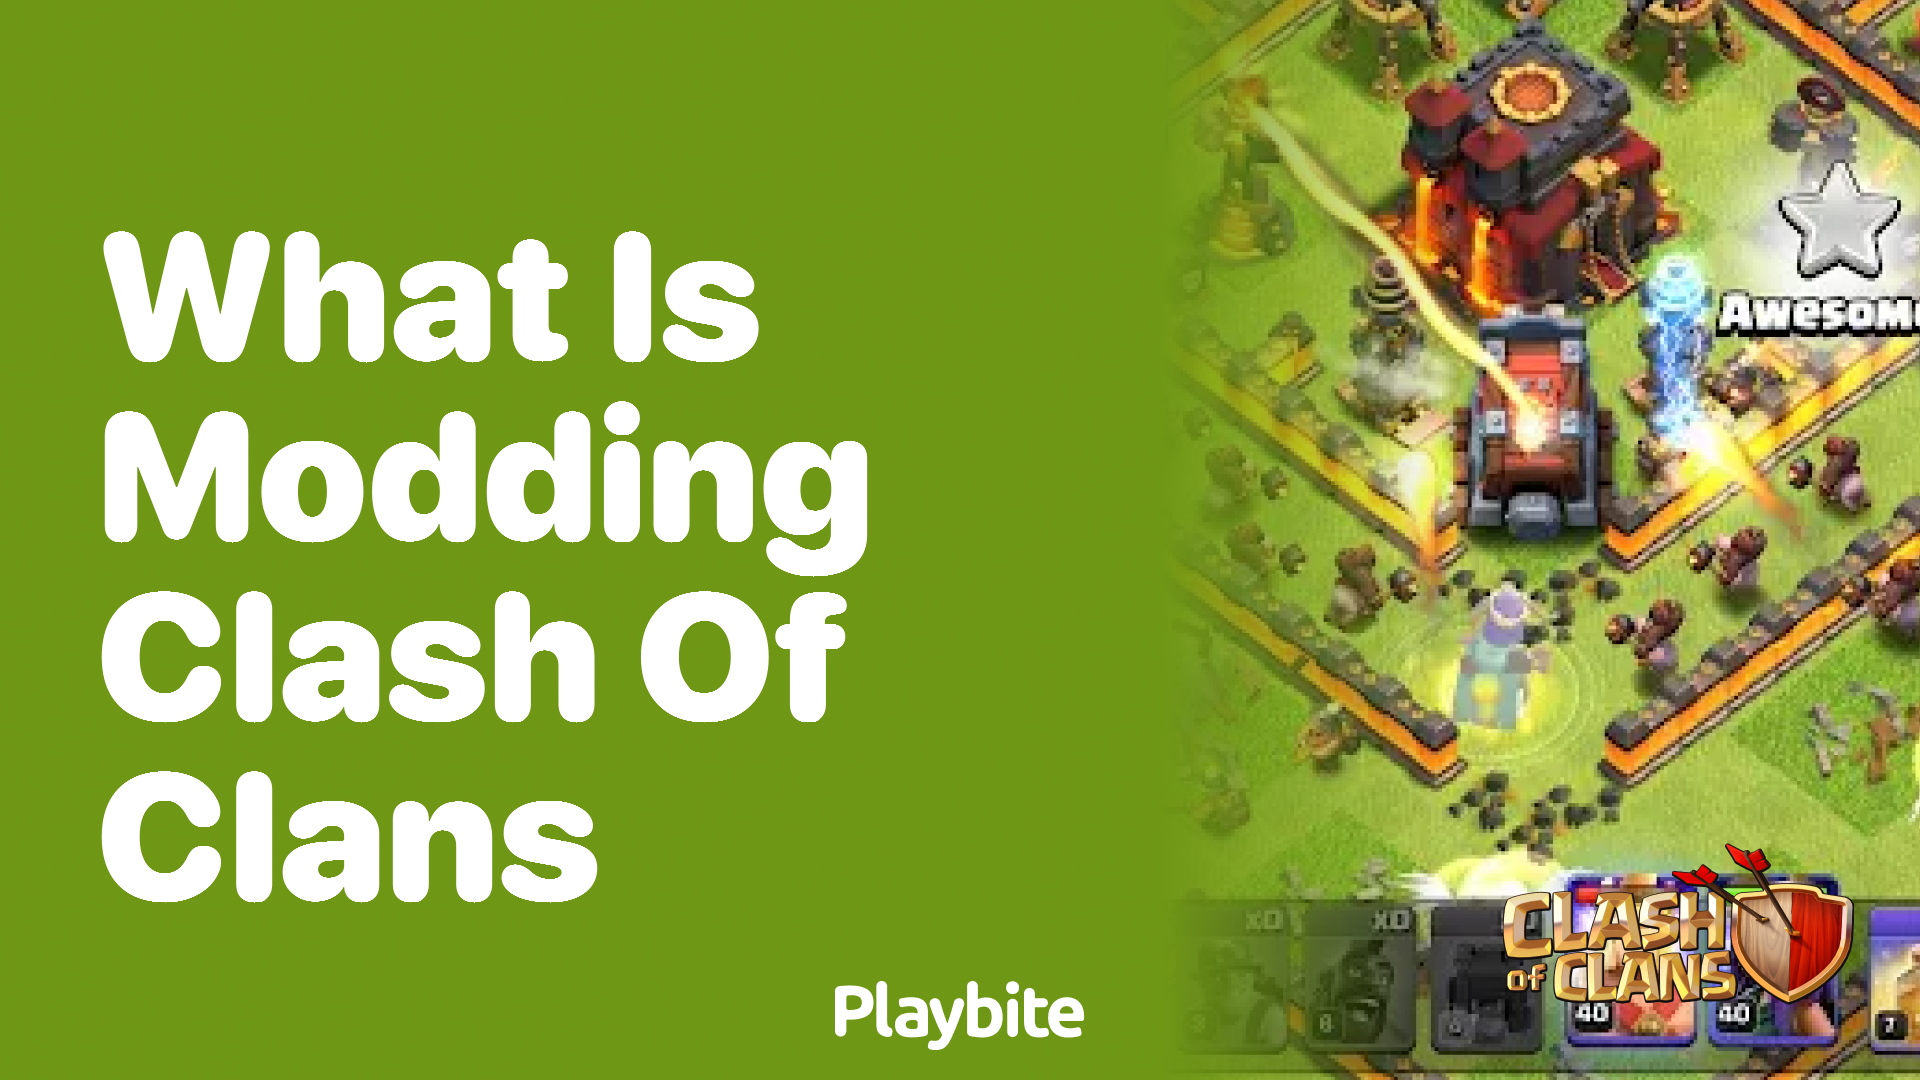 What is Modding Clash of Clans? Understanding the Basics